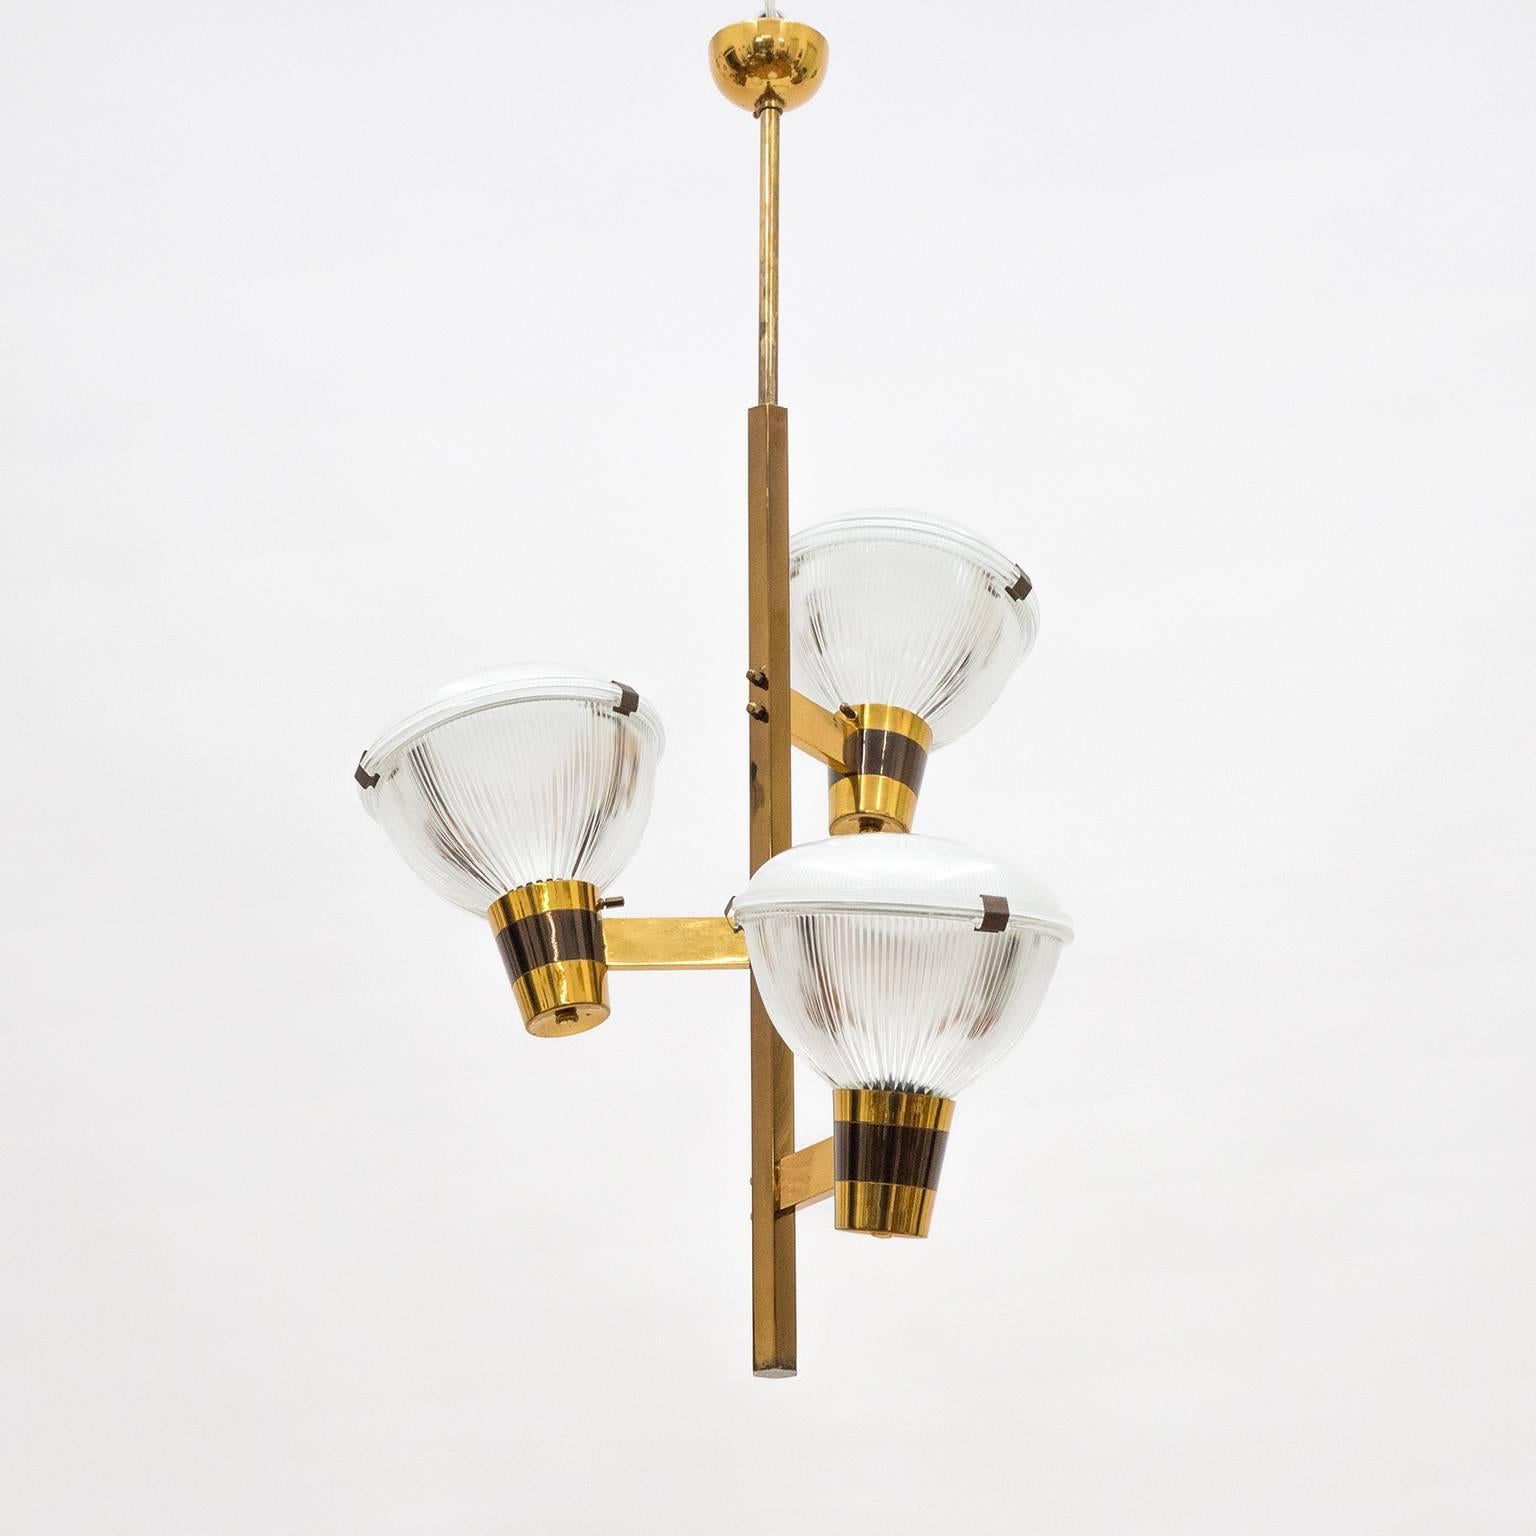 Excellent Stilnovo brass chandelier from the late 1950s. The entire hardware is made of brass that has been patinated in various degrees. Three large (7.5inches/19cm diameter) Holophane glass elements each house one E27 socket with new wiring. Very